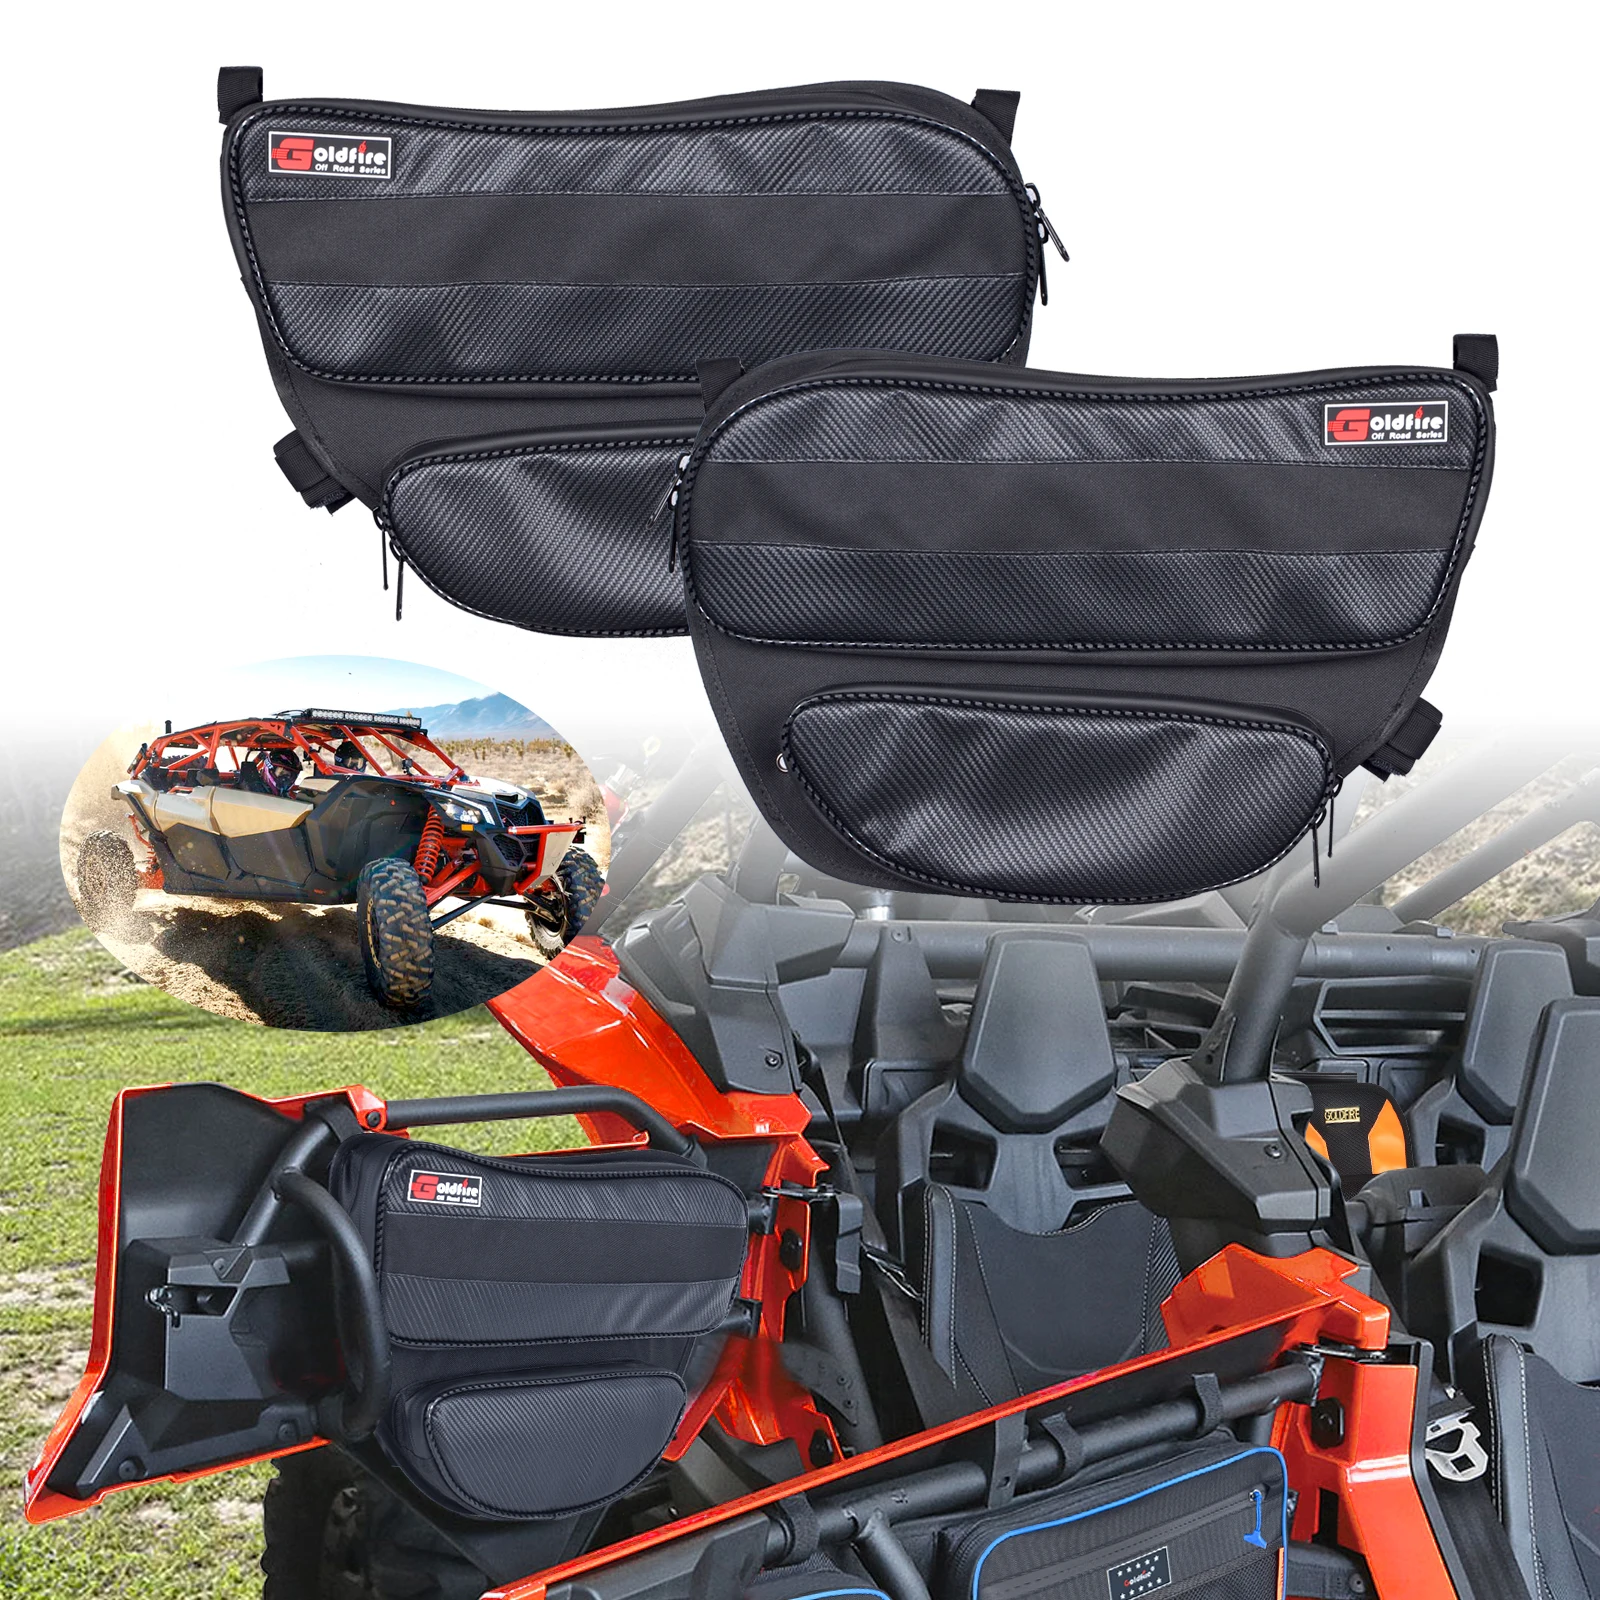 For Can Am Maverick X3 Accessories Door Bags Stogebag Organizer & Tool Pouch for 2017-2021 Can Am Maverick X3 Max Turbo R